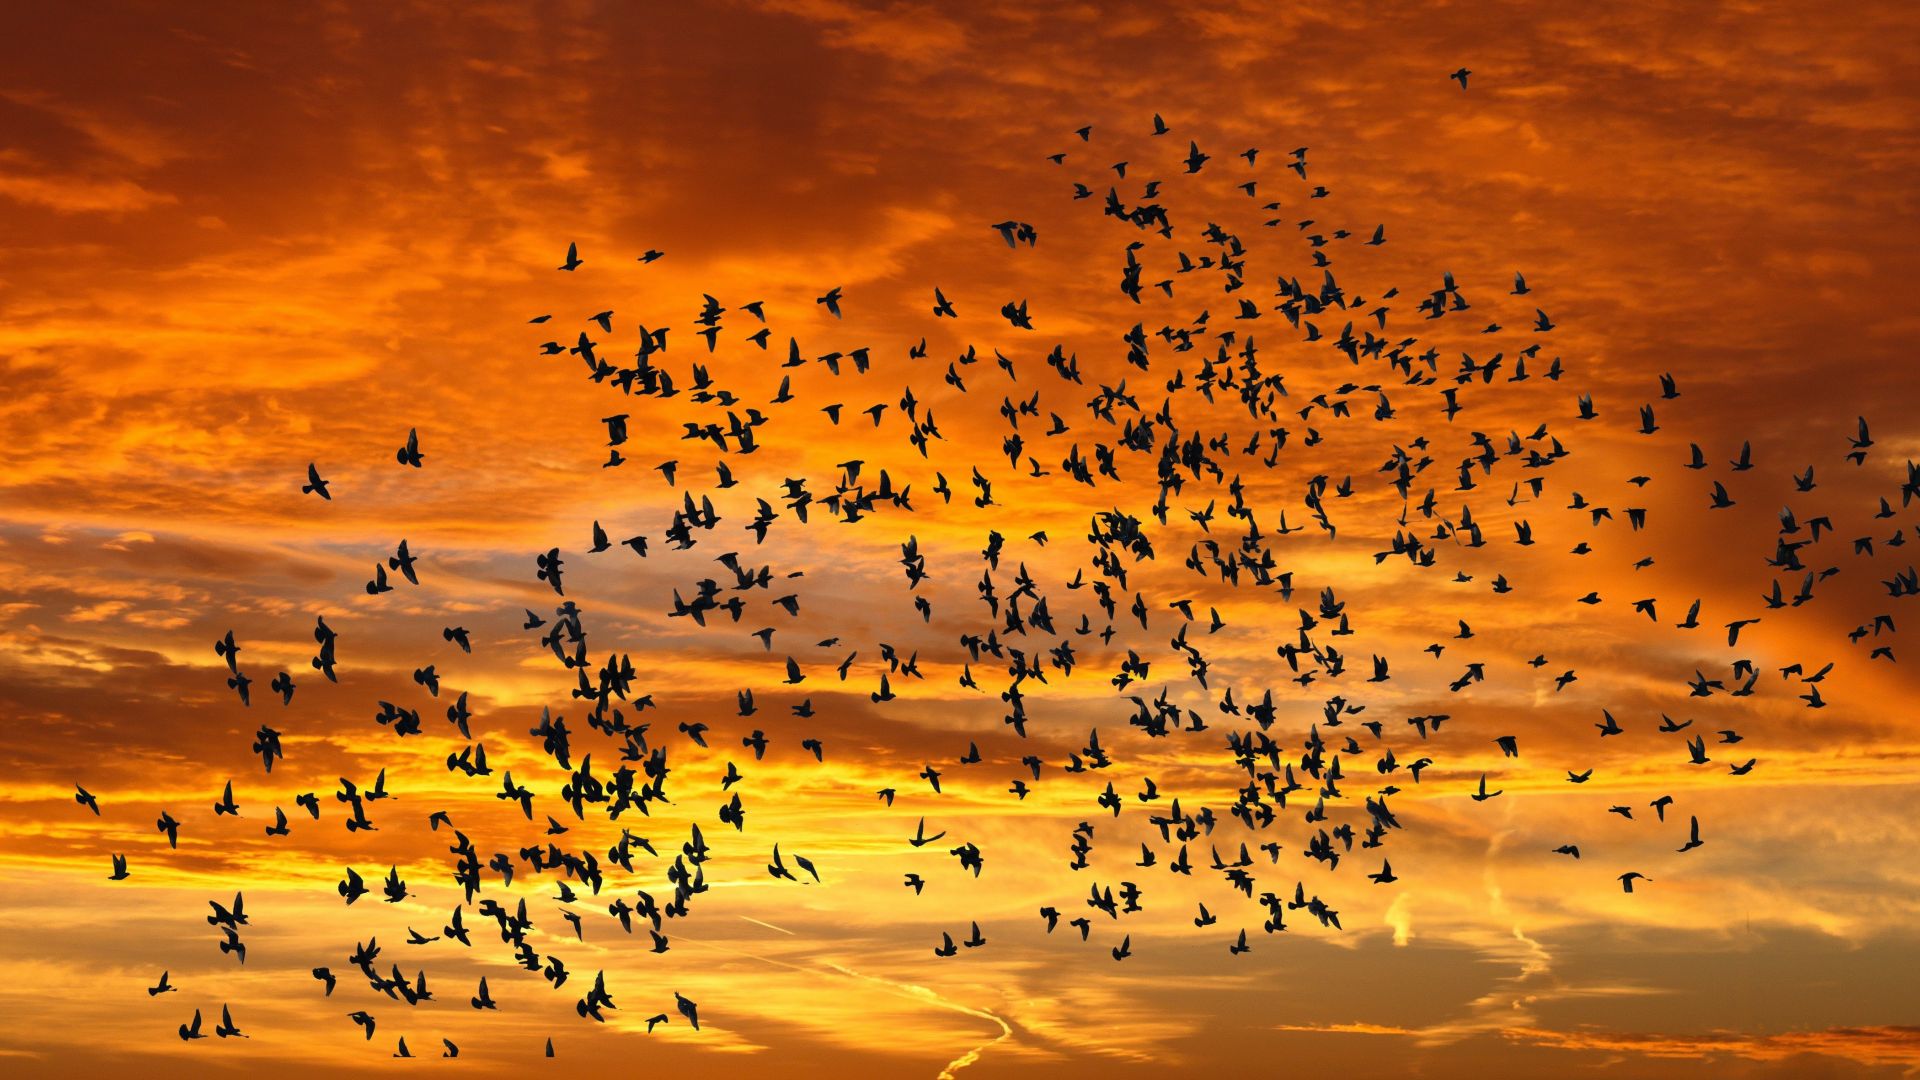 Sunset, birds, sky wallpaper, HD image, picture, background, 3431ac